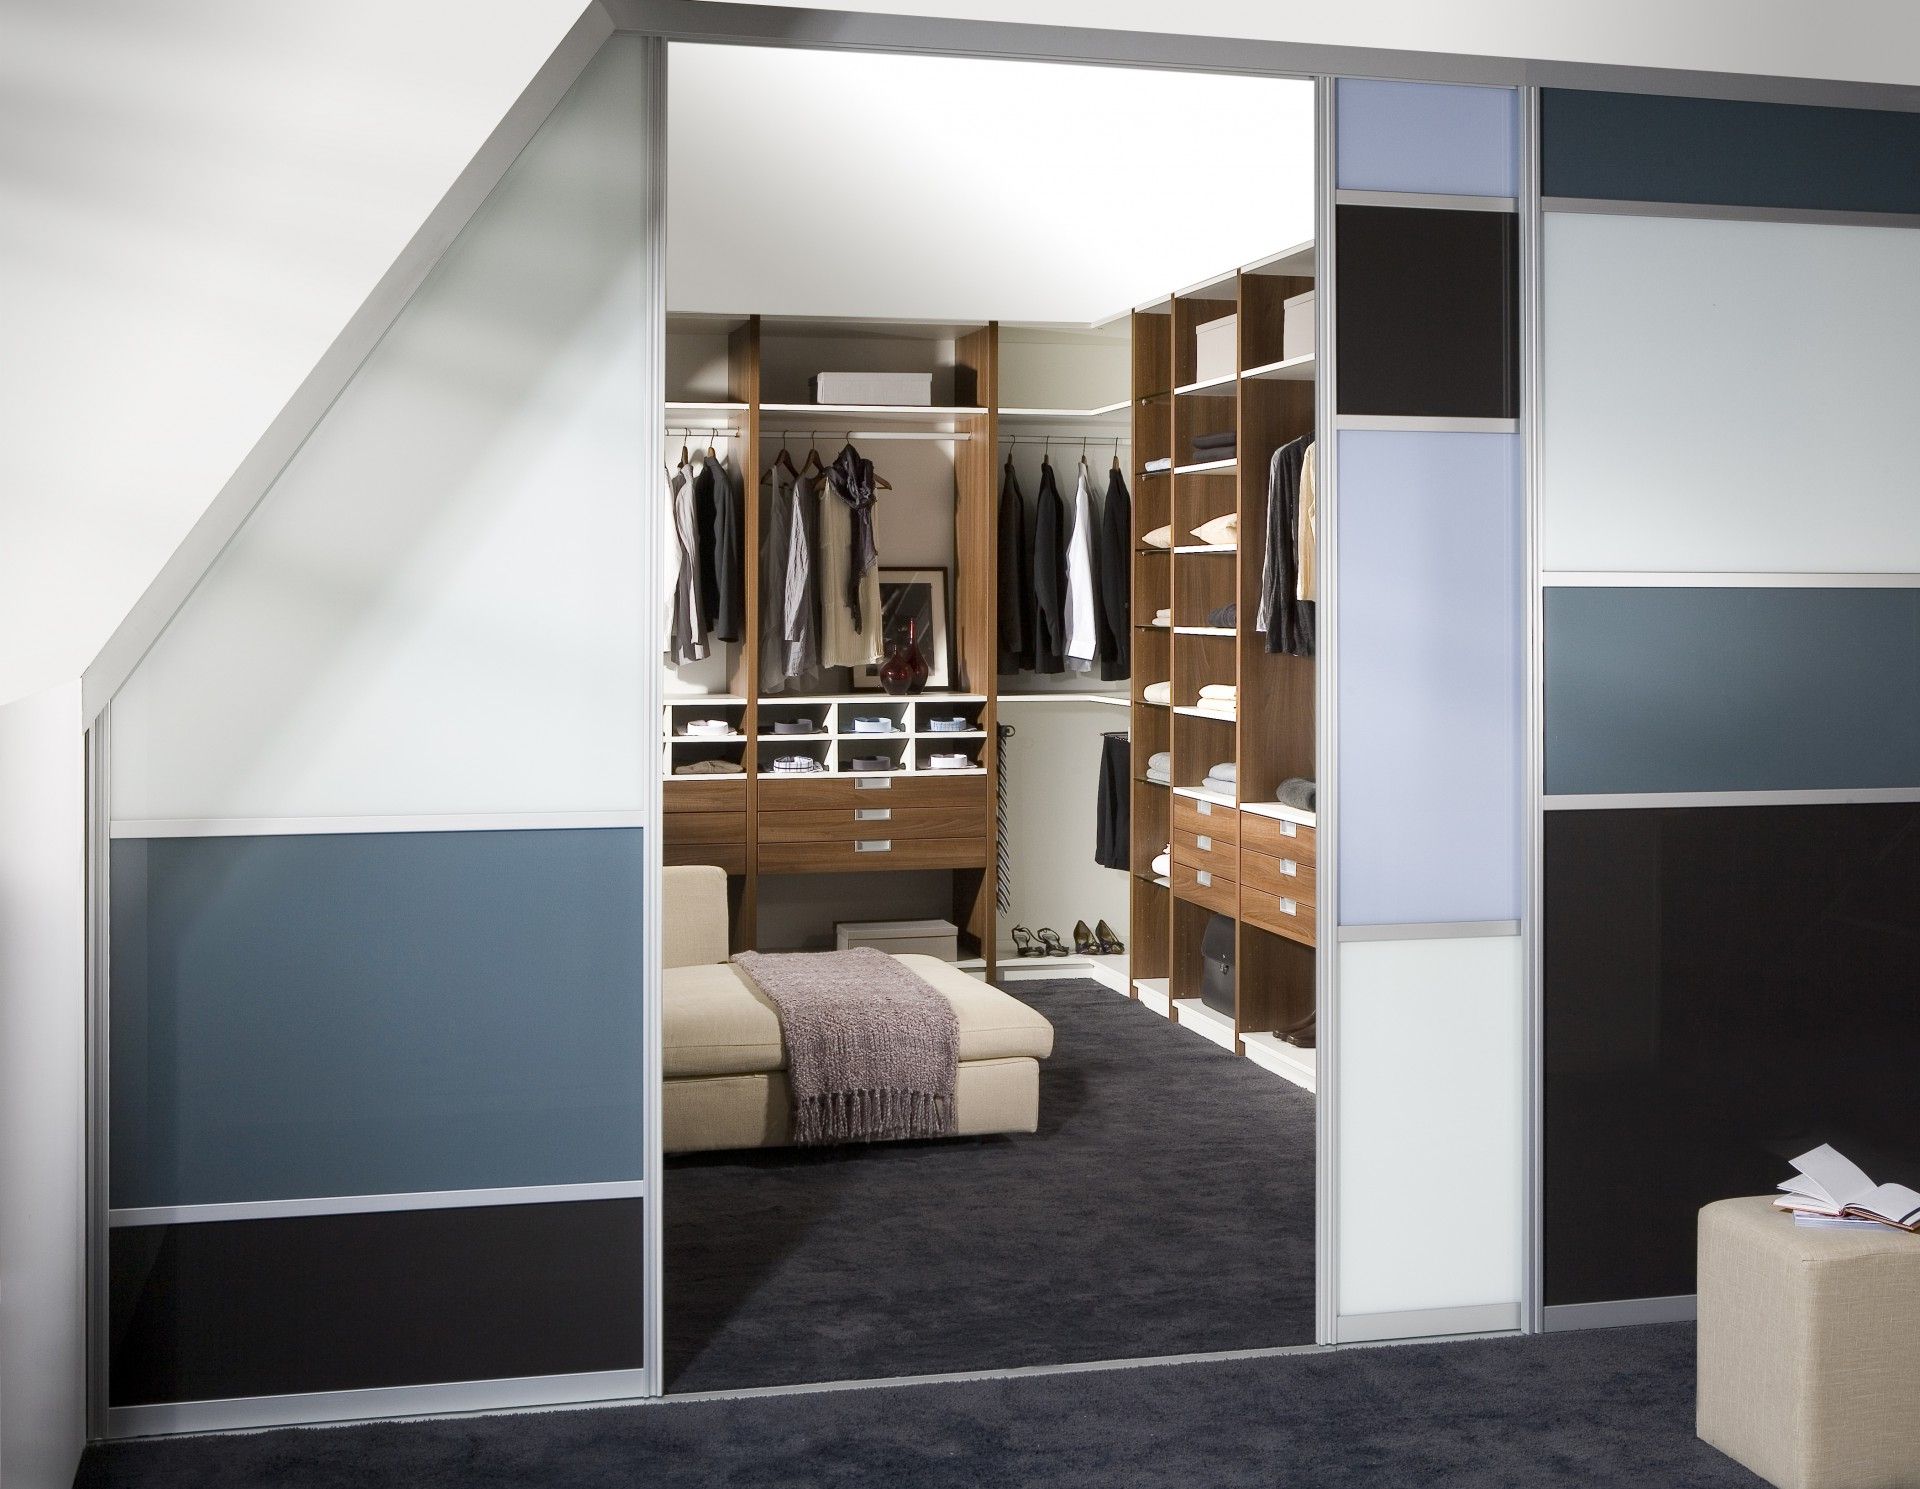 Fitted Angled Wardrobes | Deane Interiors | Hampshire Showroom Within Hampshire Wardrobes (View 18 of 20)